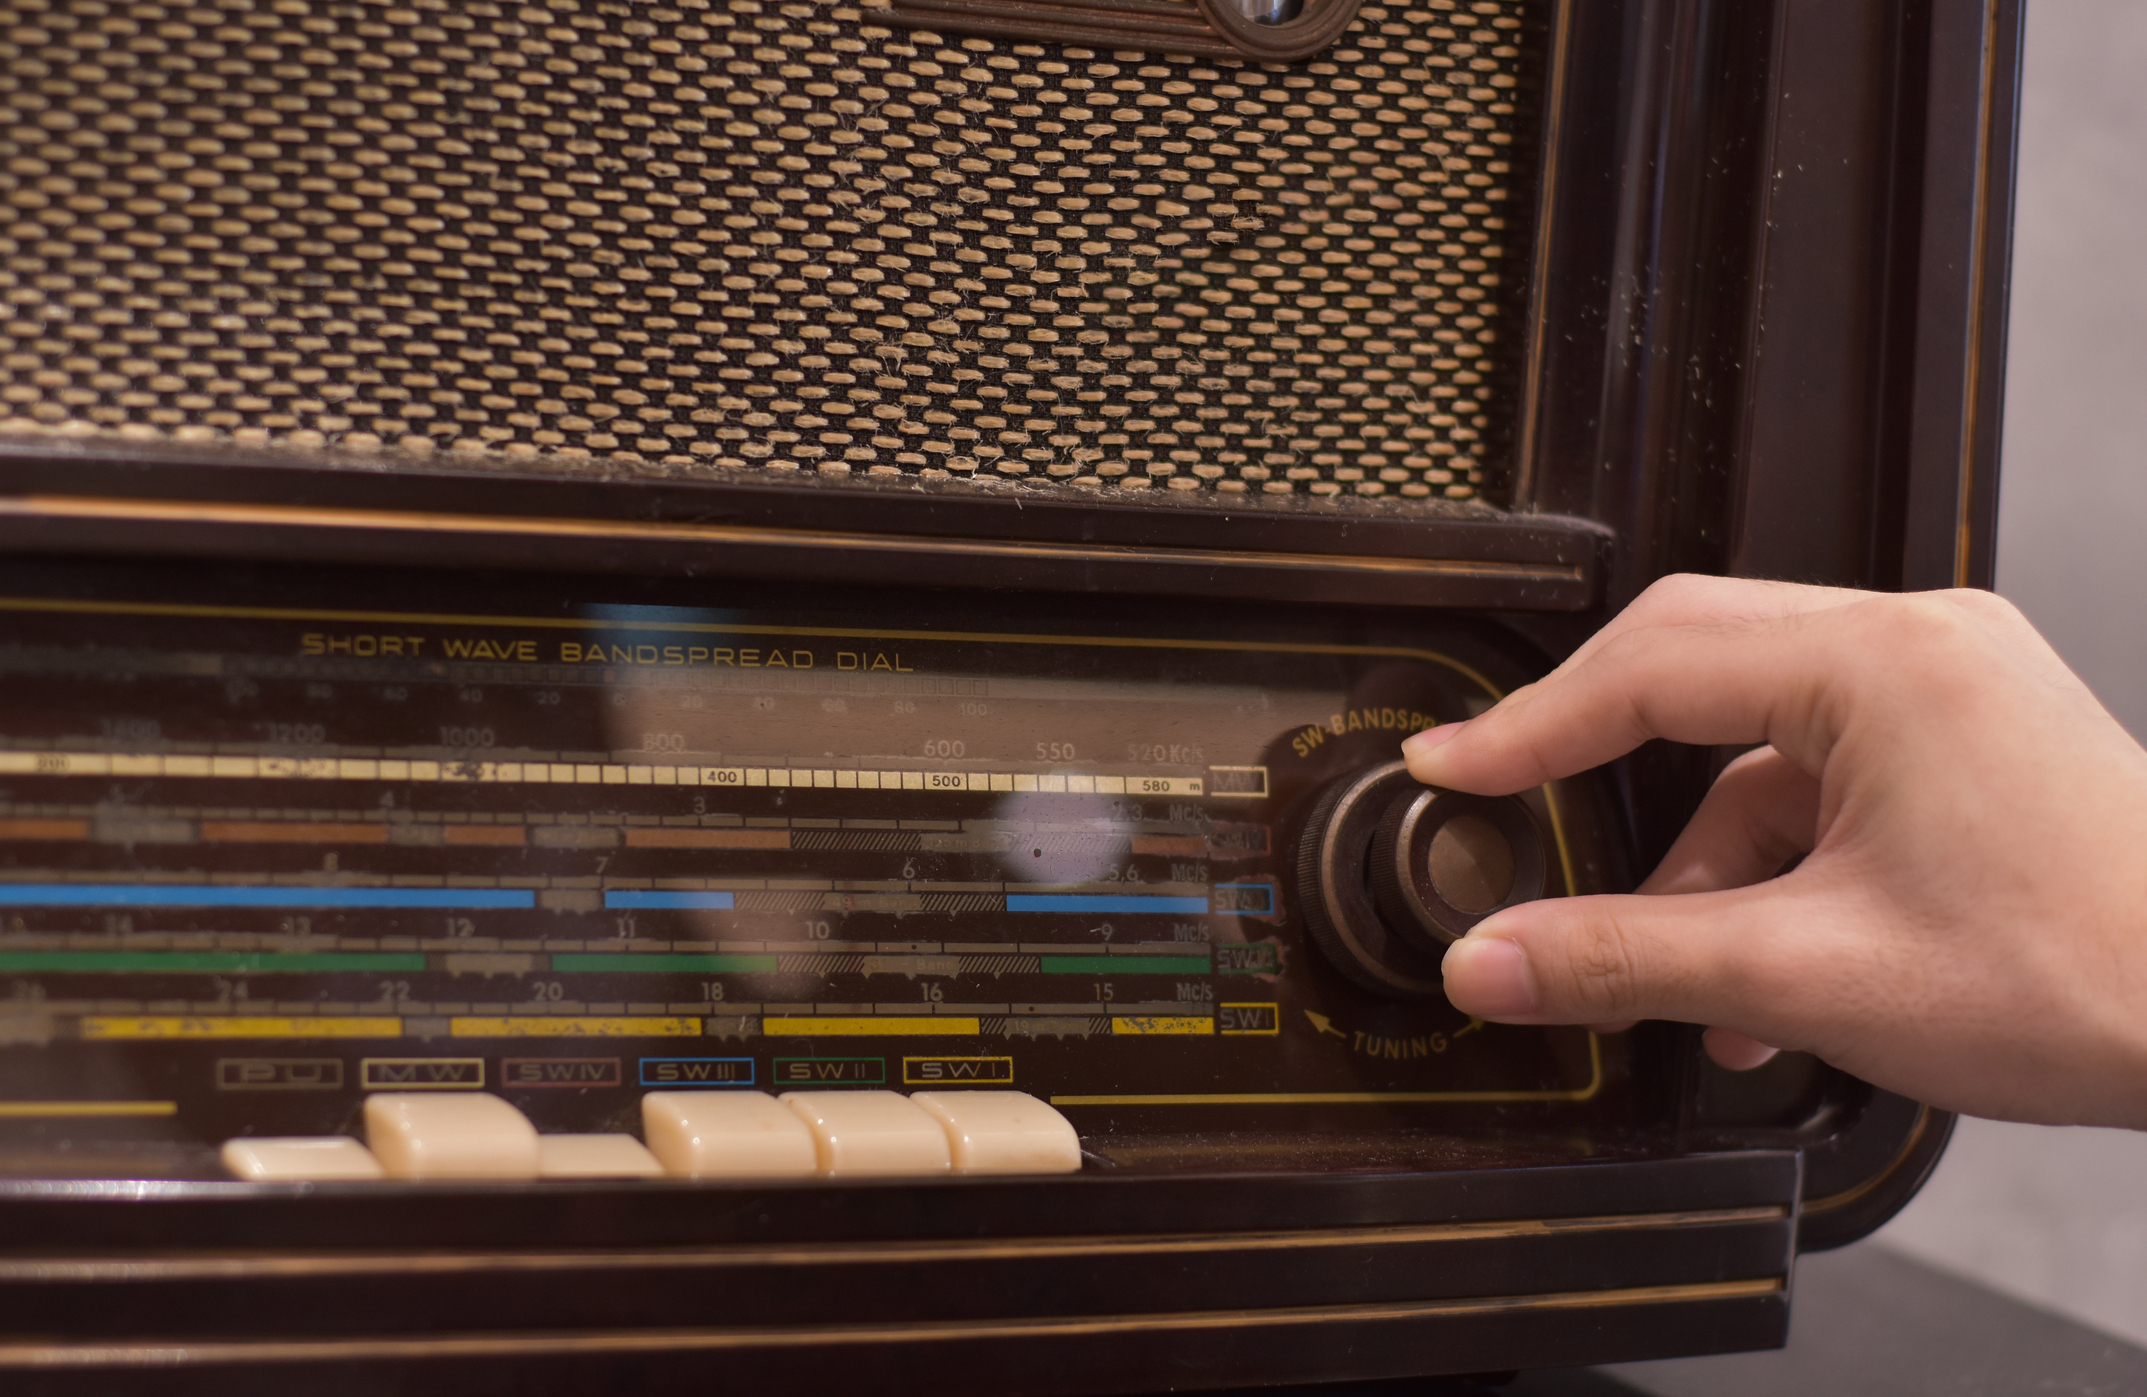 Person tuning an old-fashioned radio with a dial and buttons